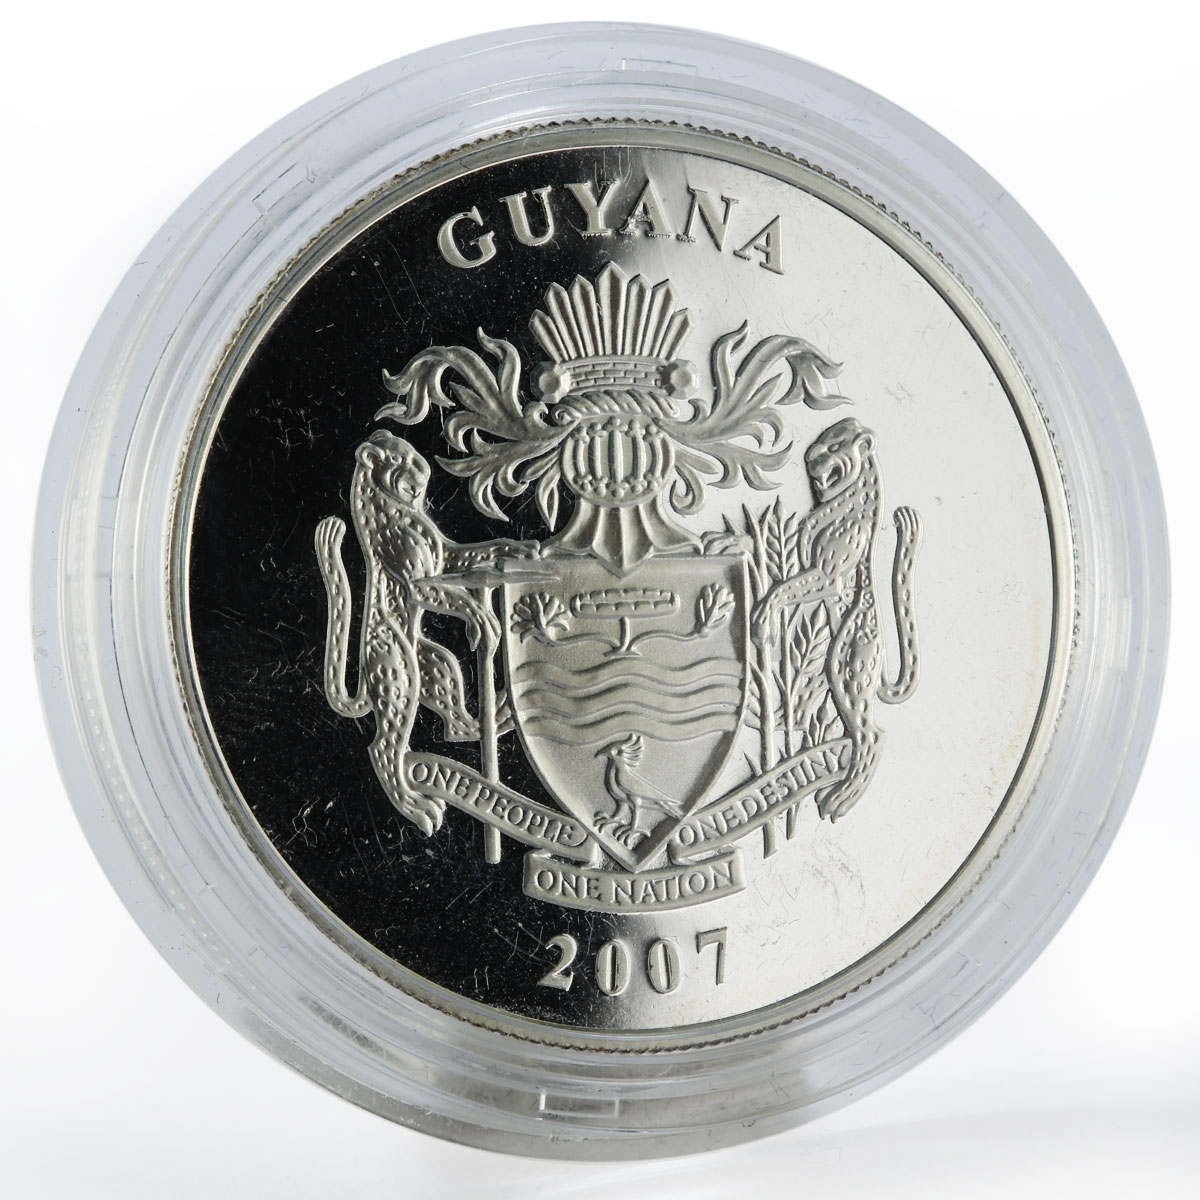 Guyana 2000 dollars Commitment to Sport Soccer Stadium proof silver coin 2007